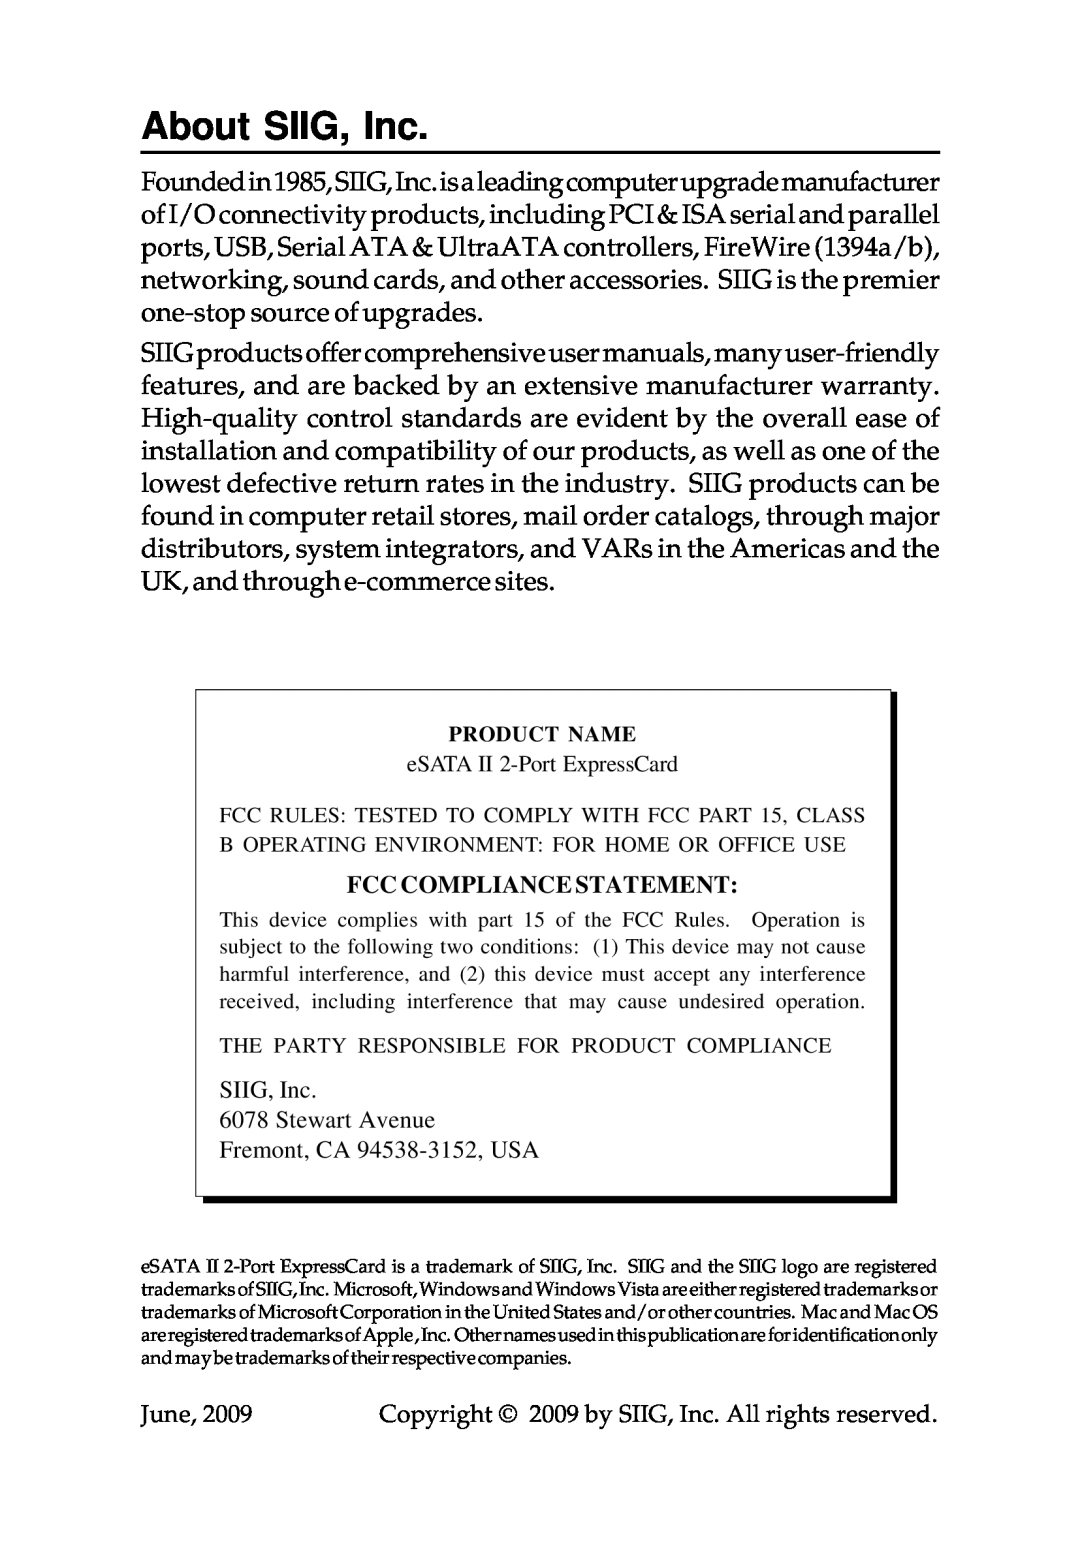 SIIG 104-0487A specifications About SIIG, Inc, Fcc Compliance Statement 